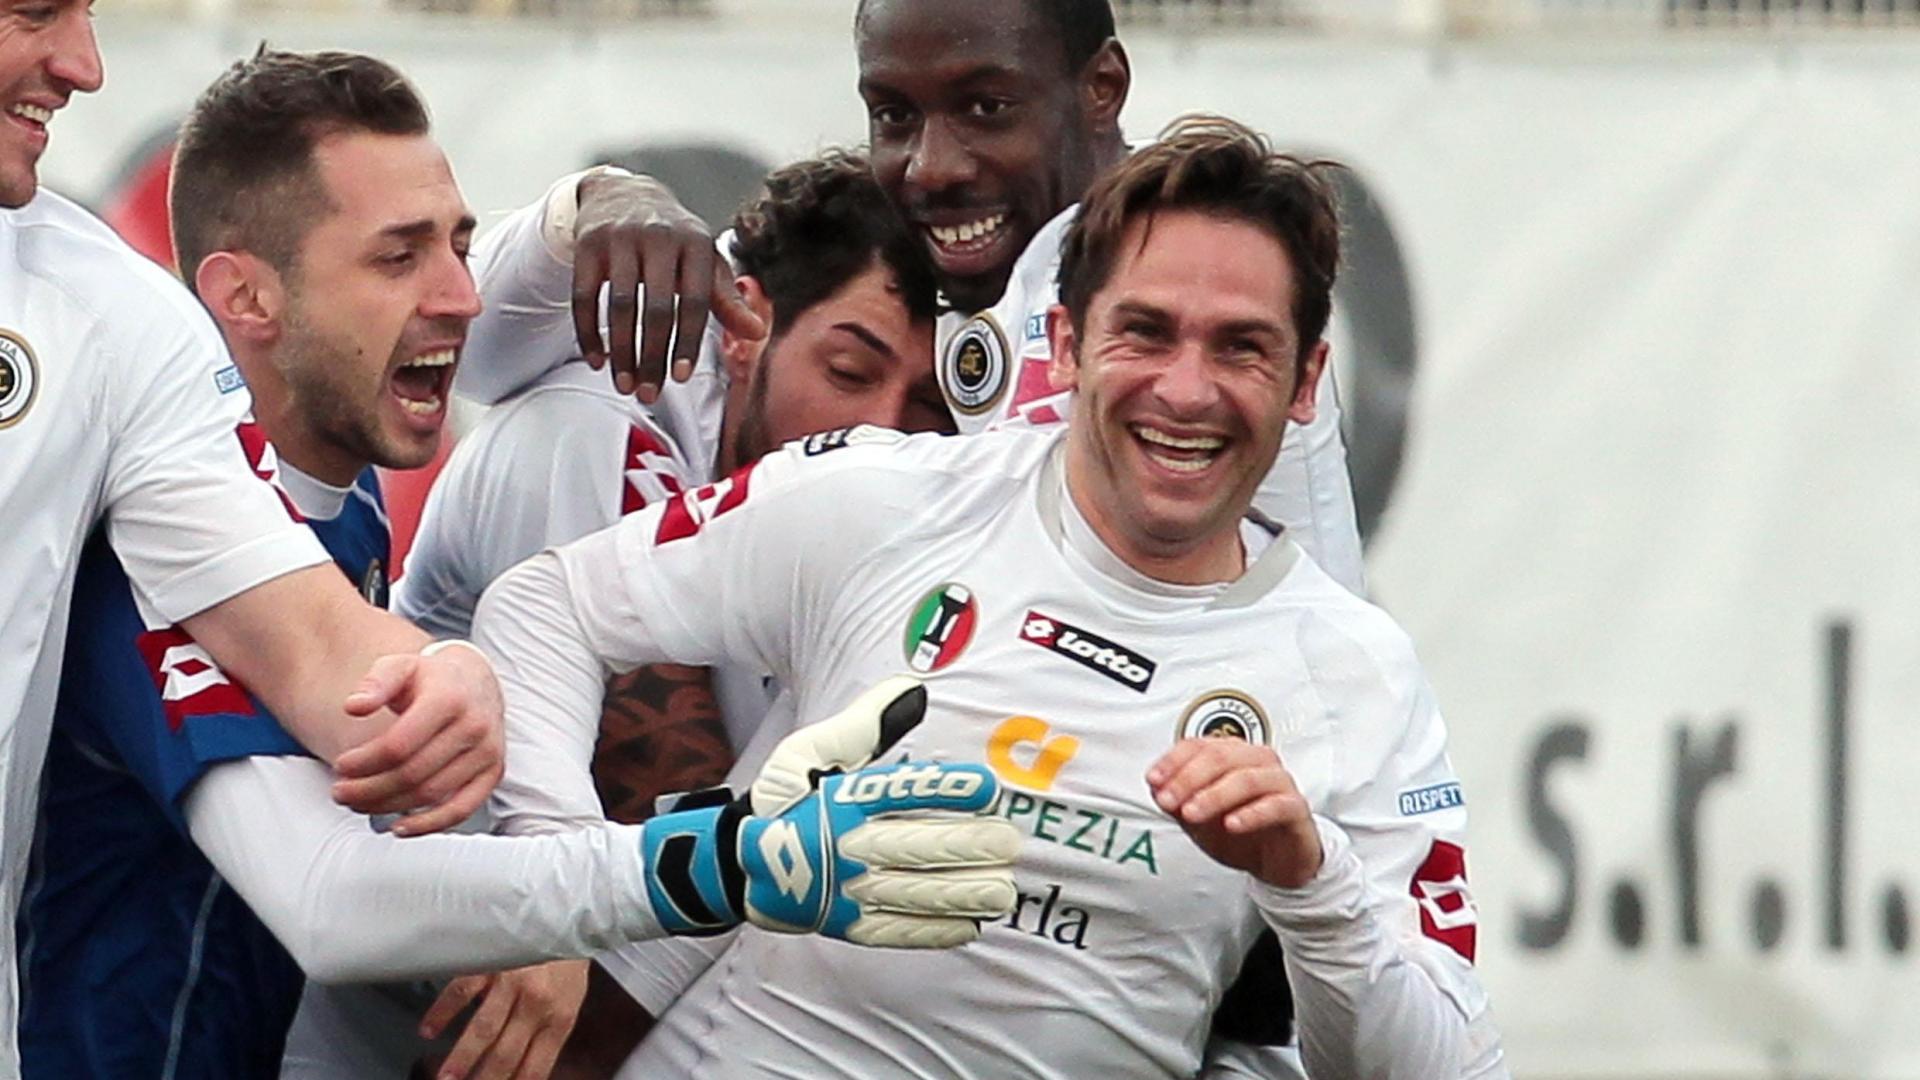 2012/2013 – Back to Serie B